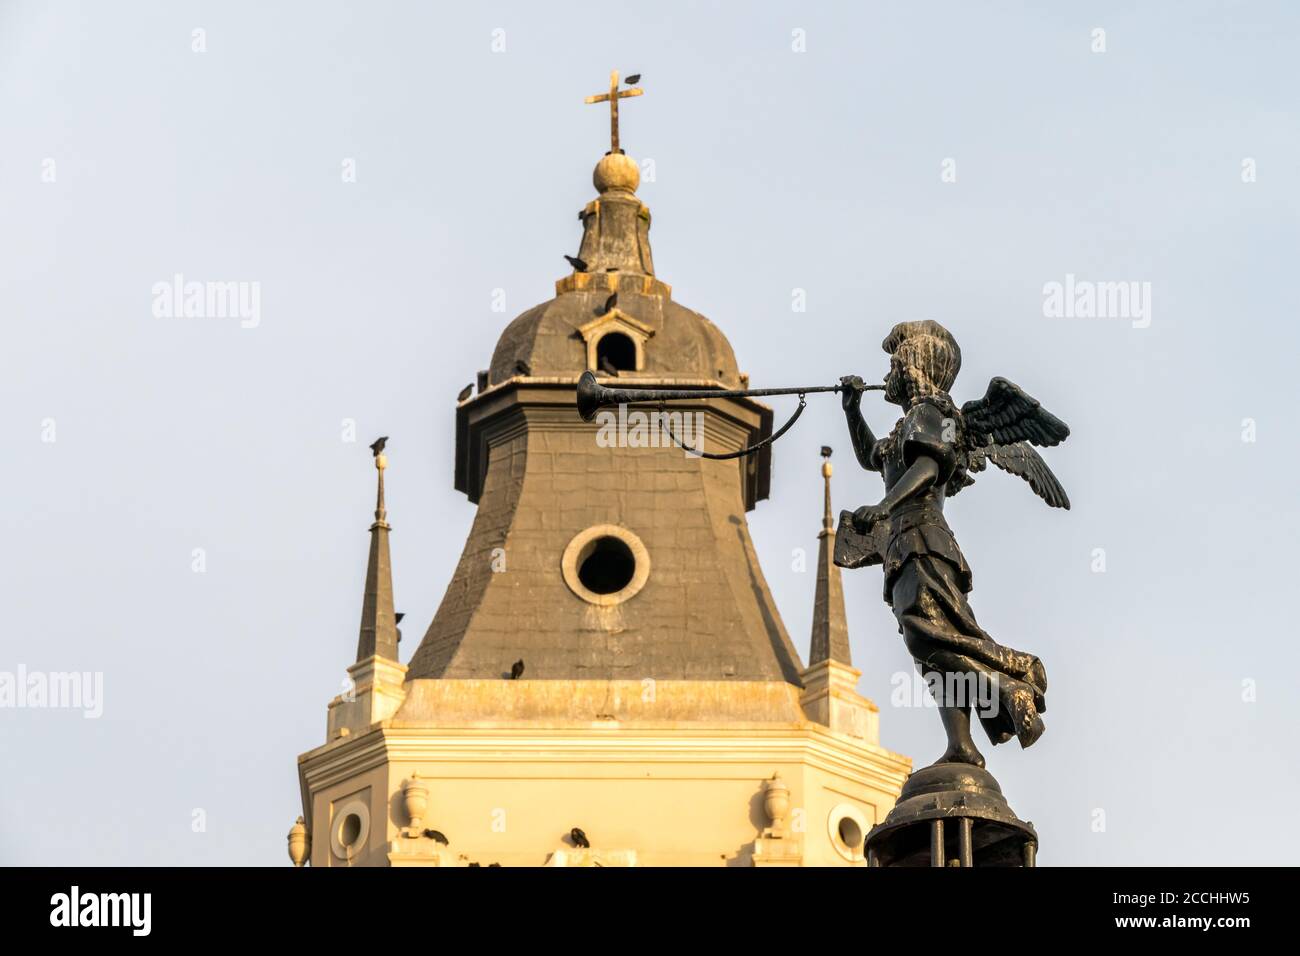 View of a statue in the historical central square of Lima, Peru Stock Photo